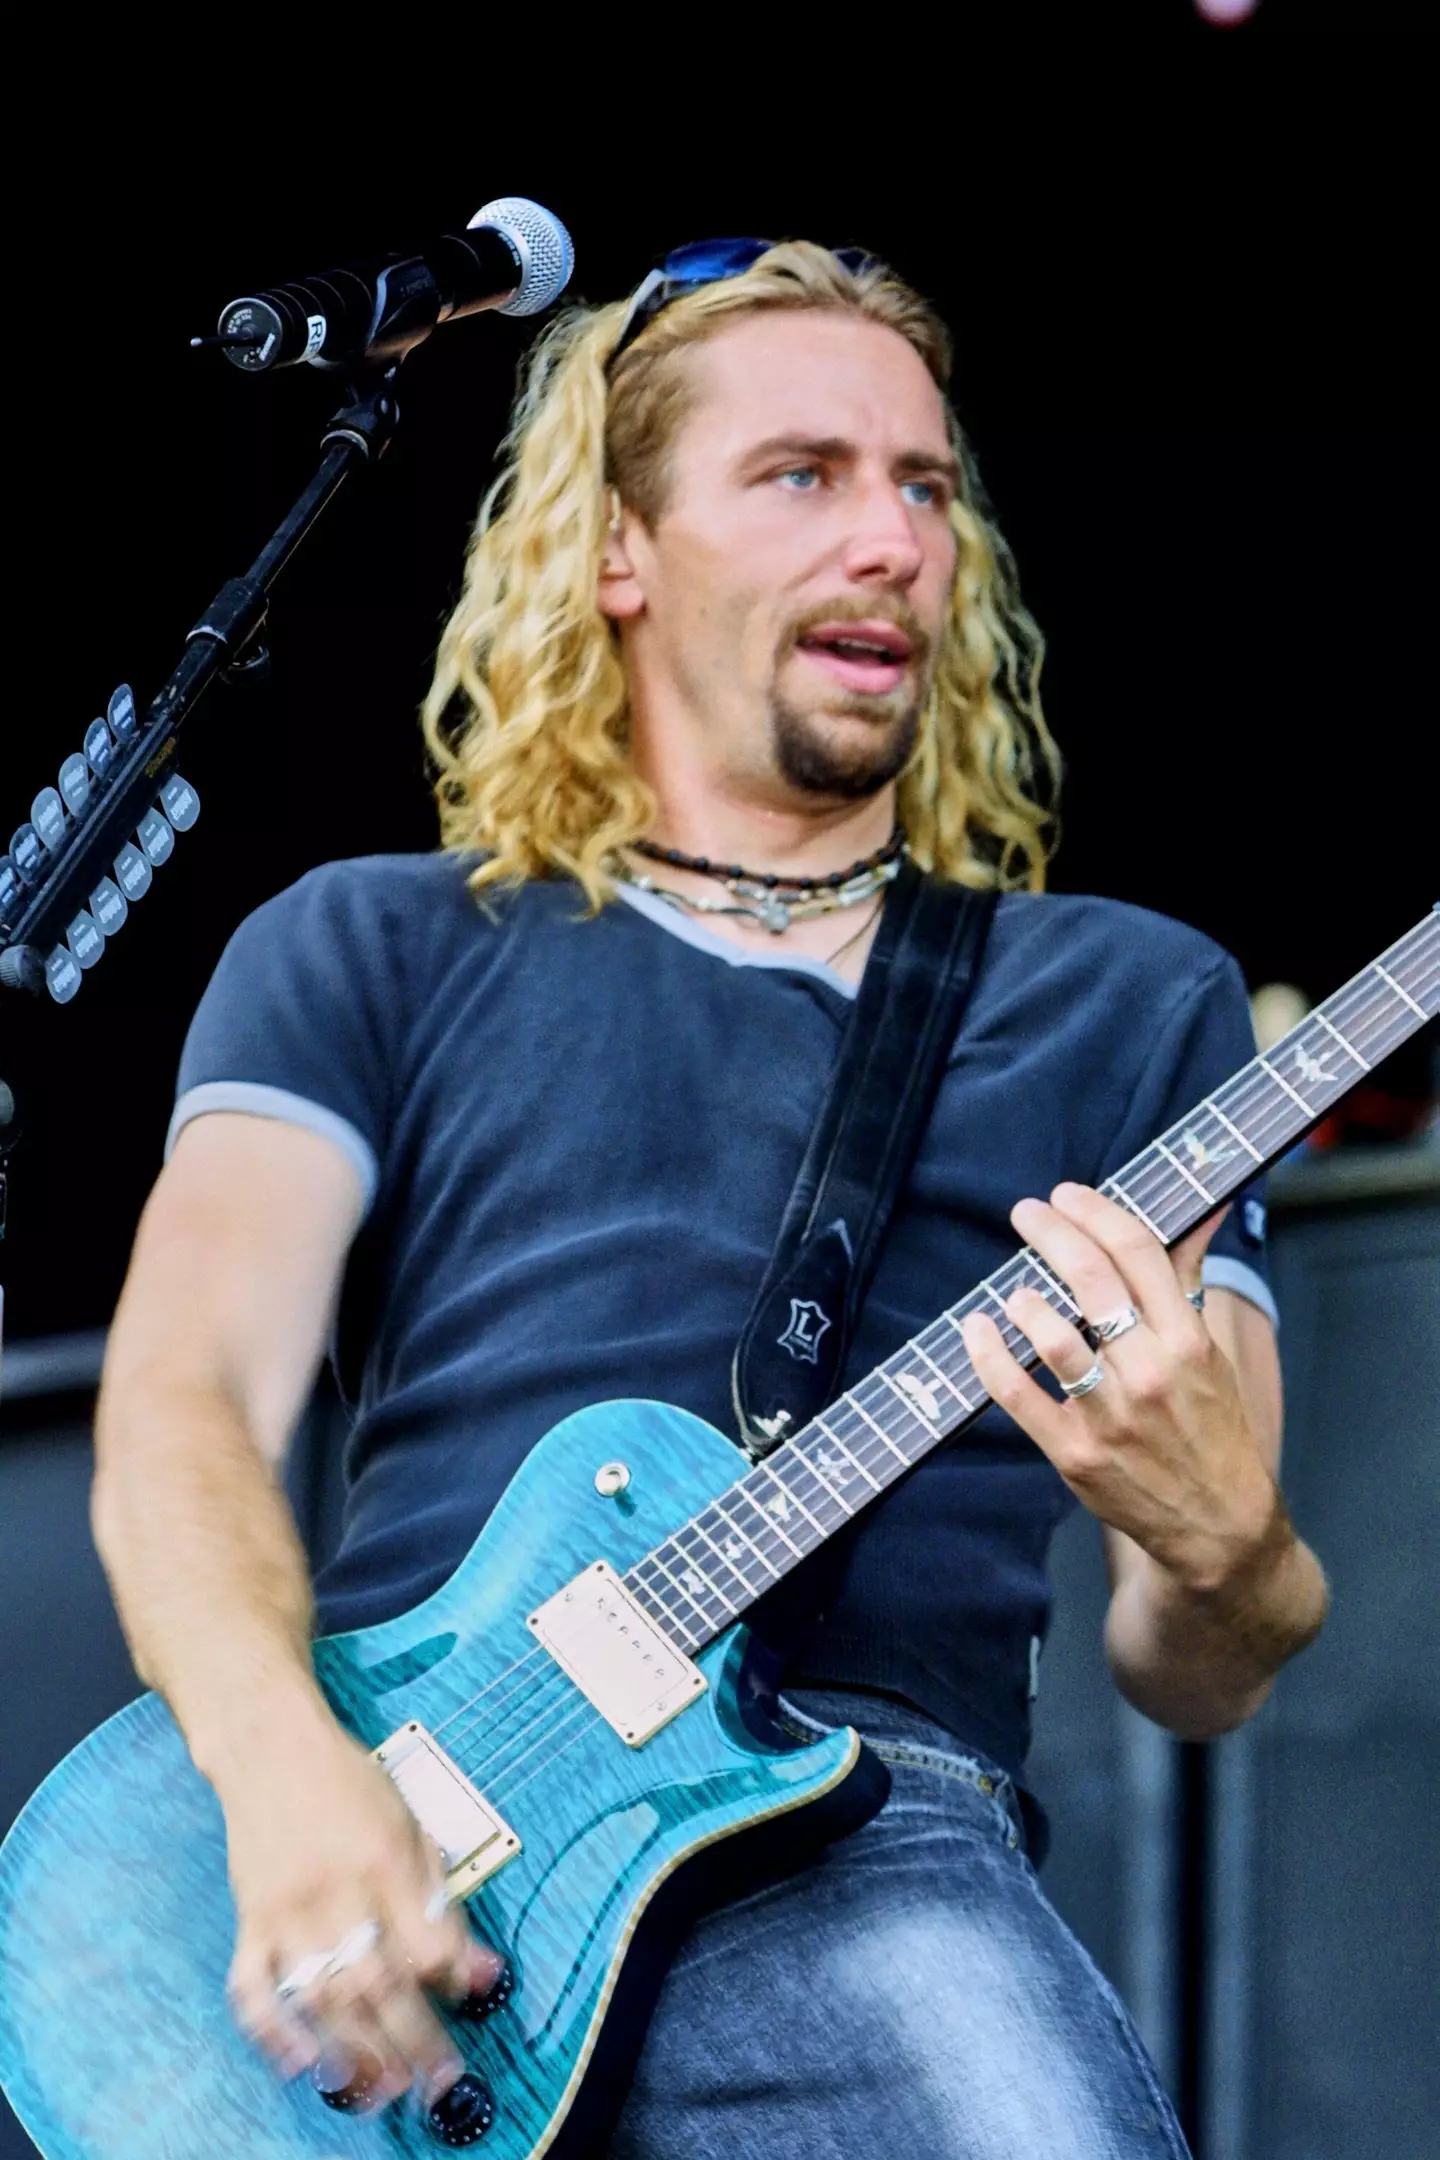 We’ve actually been pronouncing Nickelback's lead singer Chad Kroeger’s name wrong this whole time.